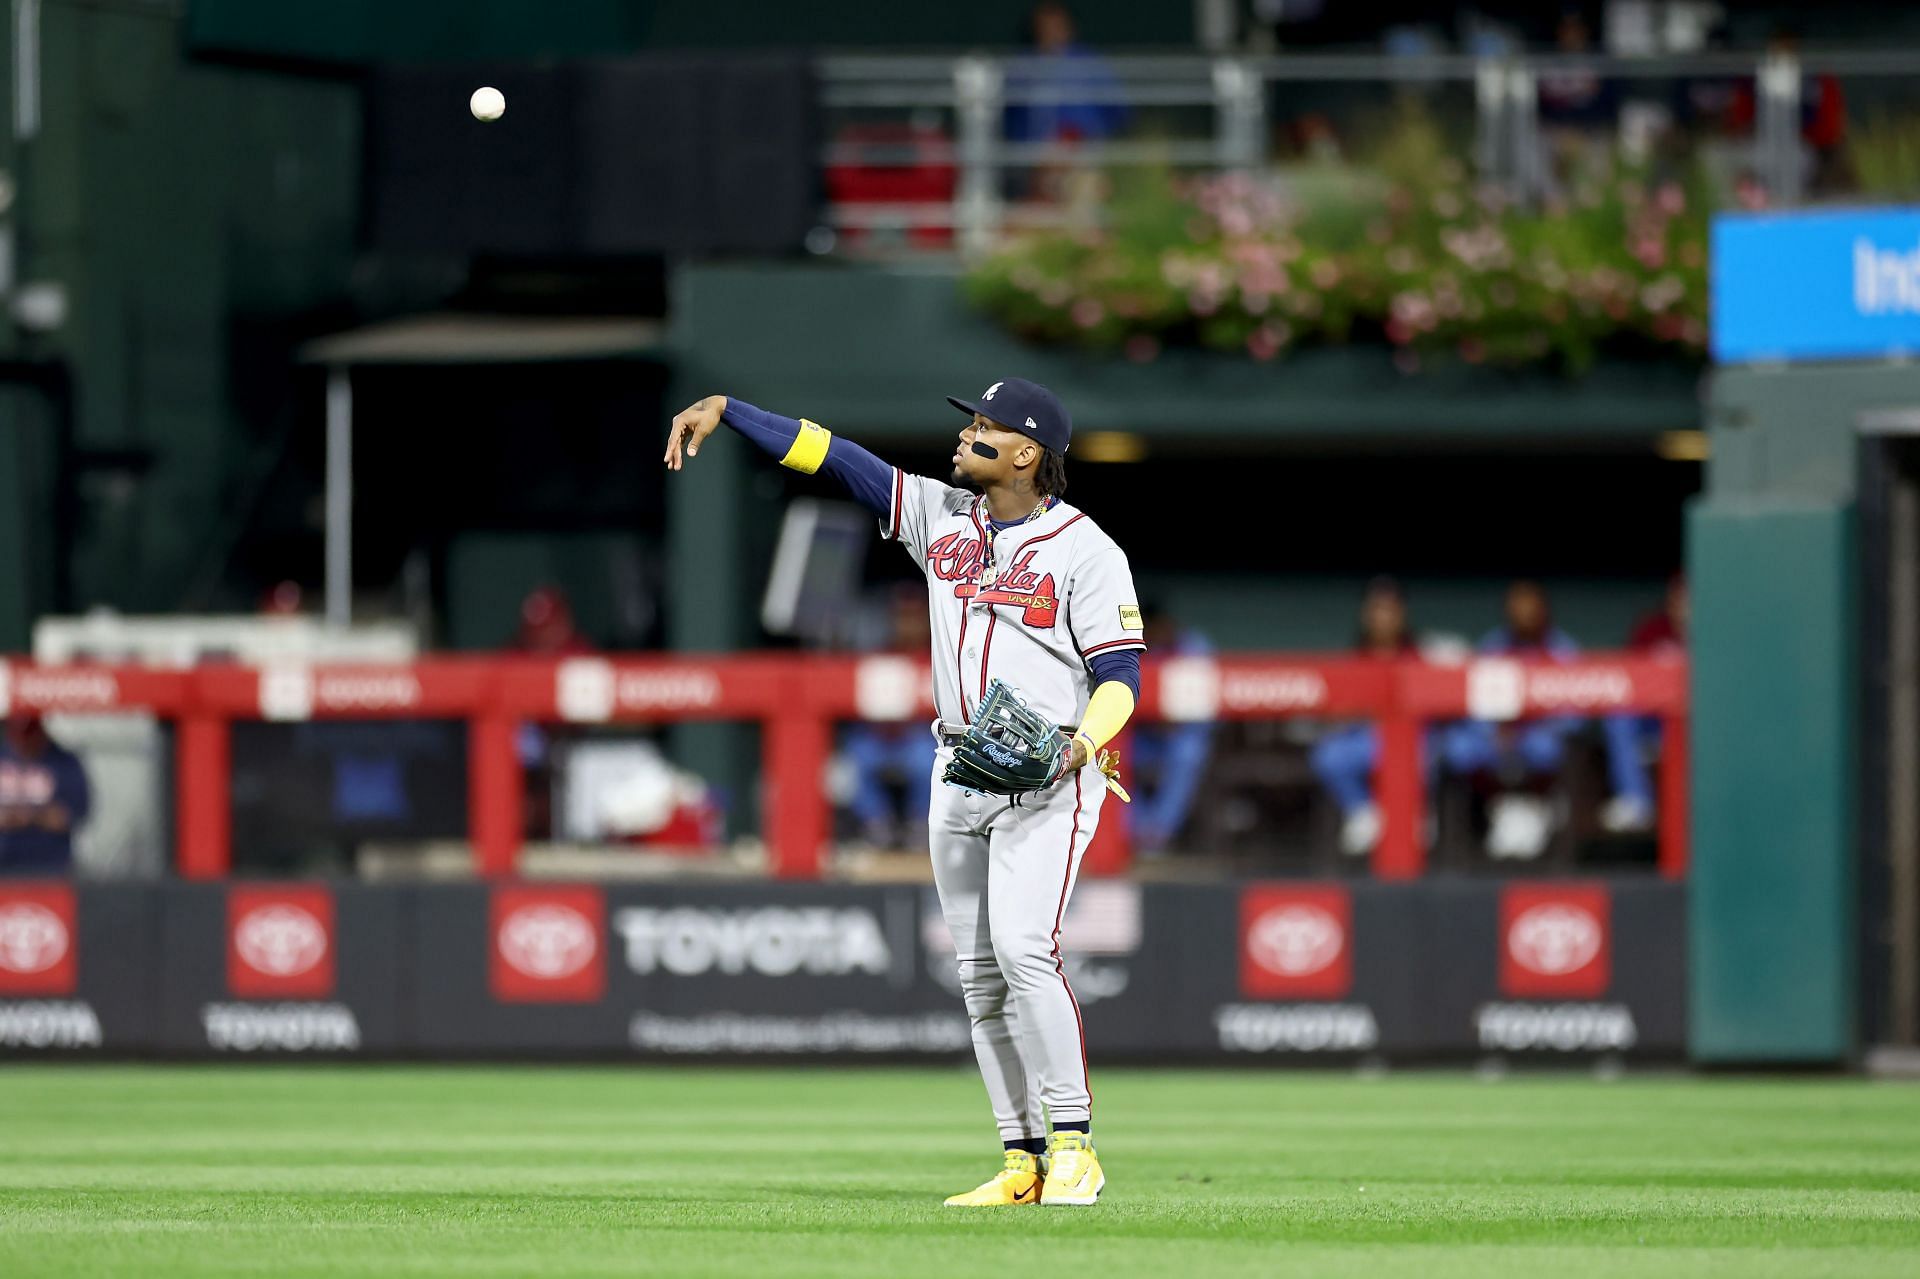 Ronald Acuna Jr. is back